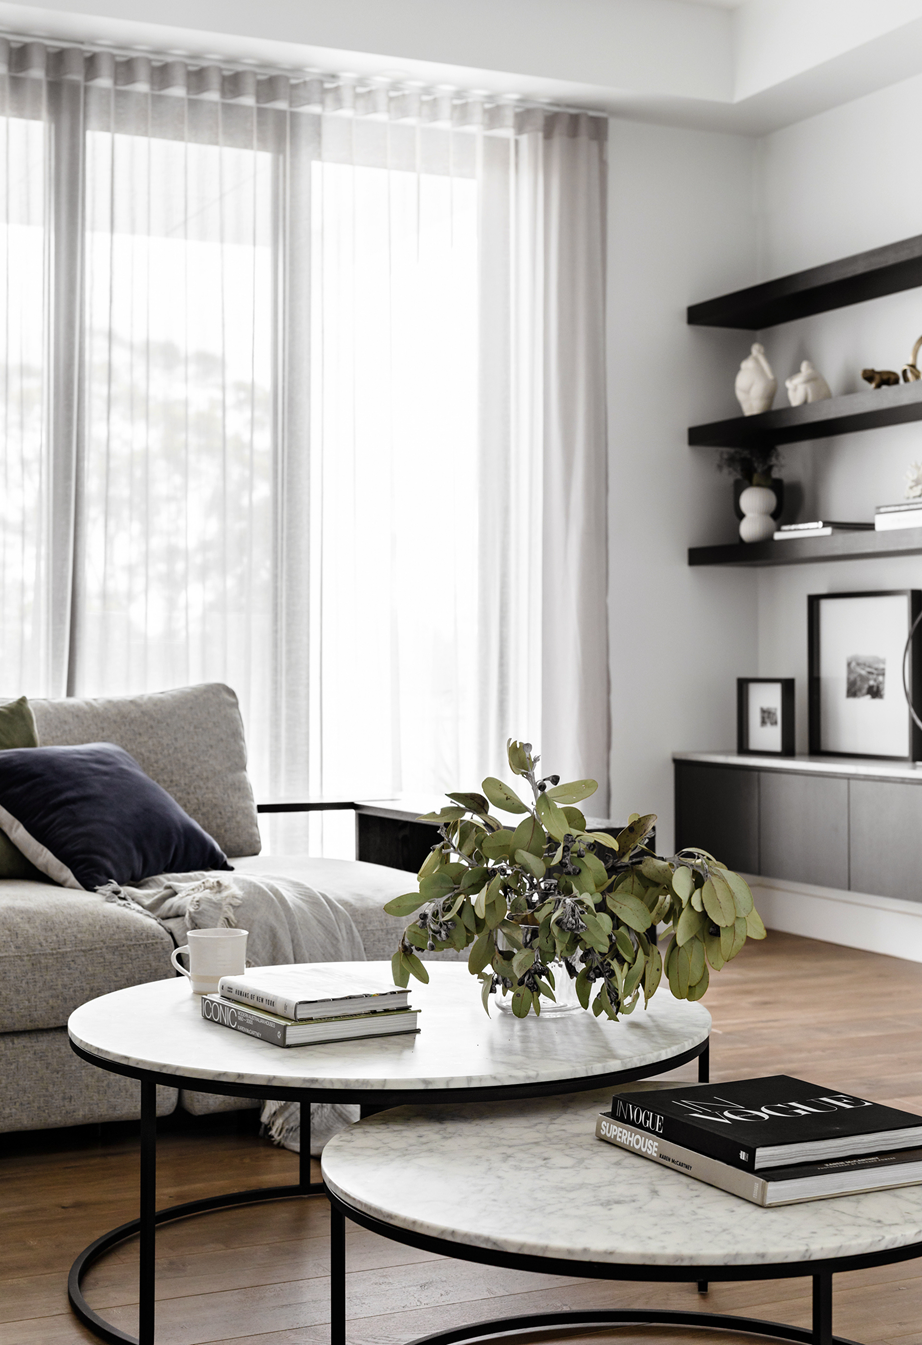 Choosing sophiscated and elegant colour
  like black and white living room